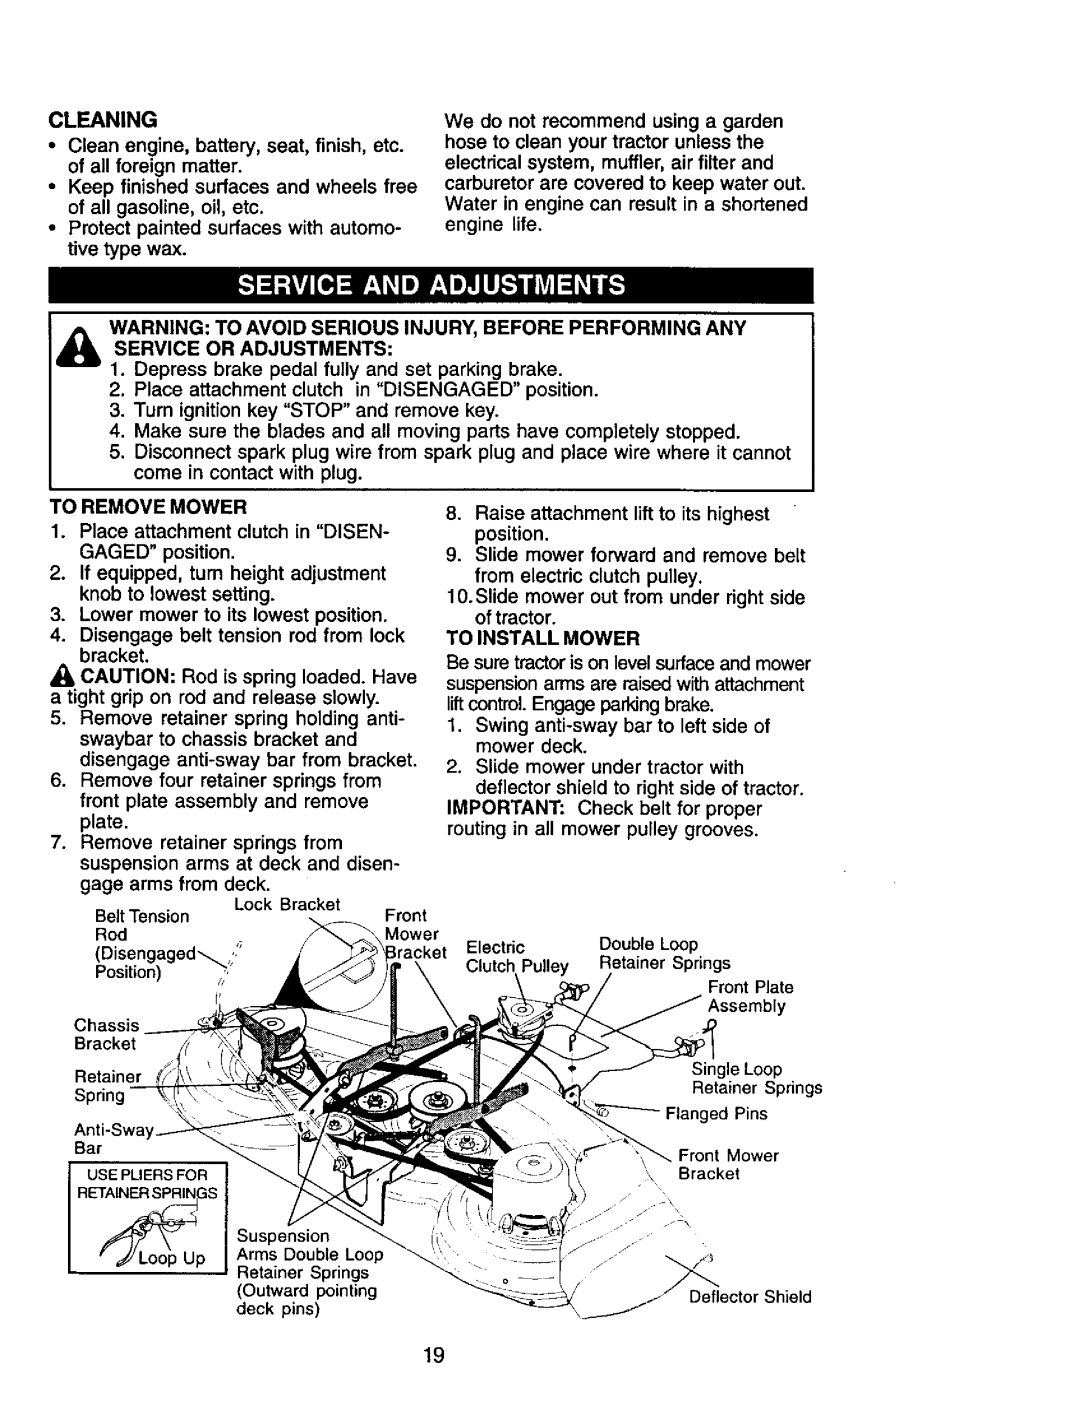 Craftsman 917.272247 owner manual Cleaning 